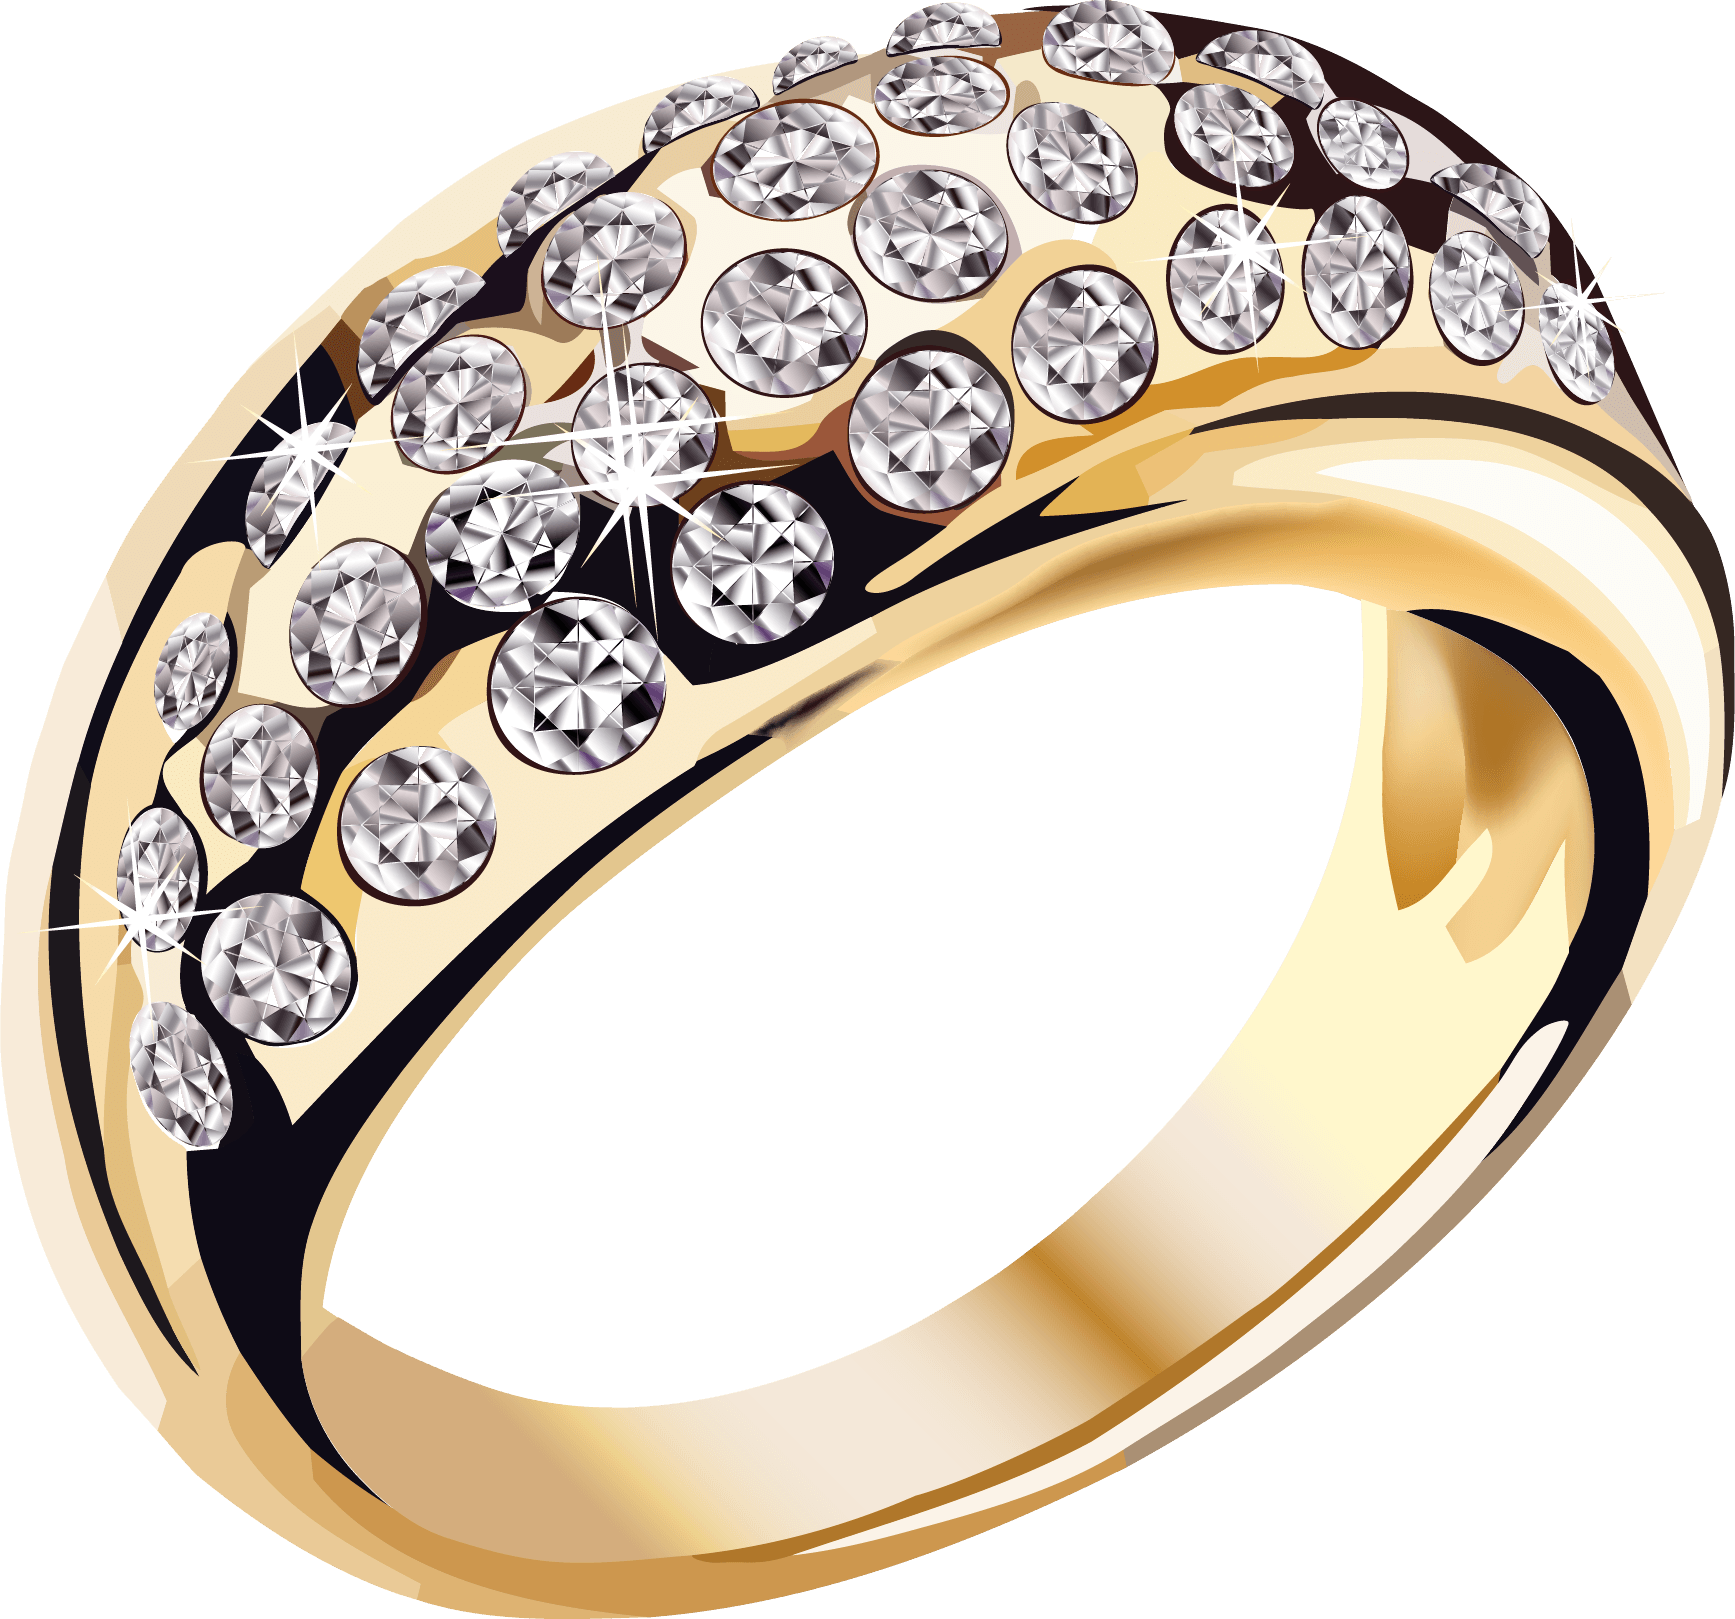 Gold Ring Png PNG Image